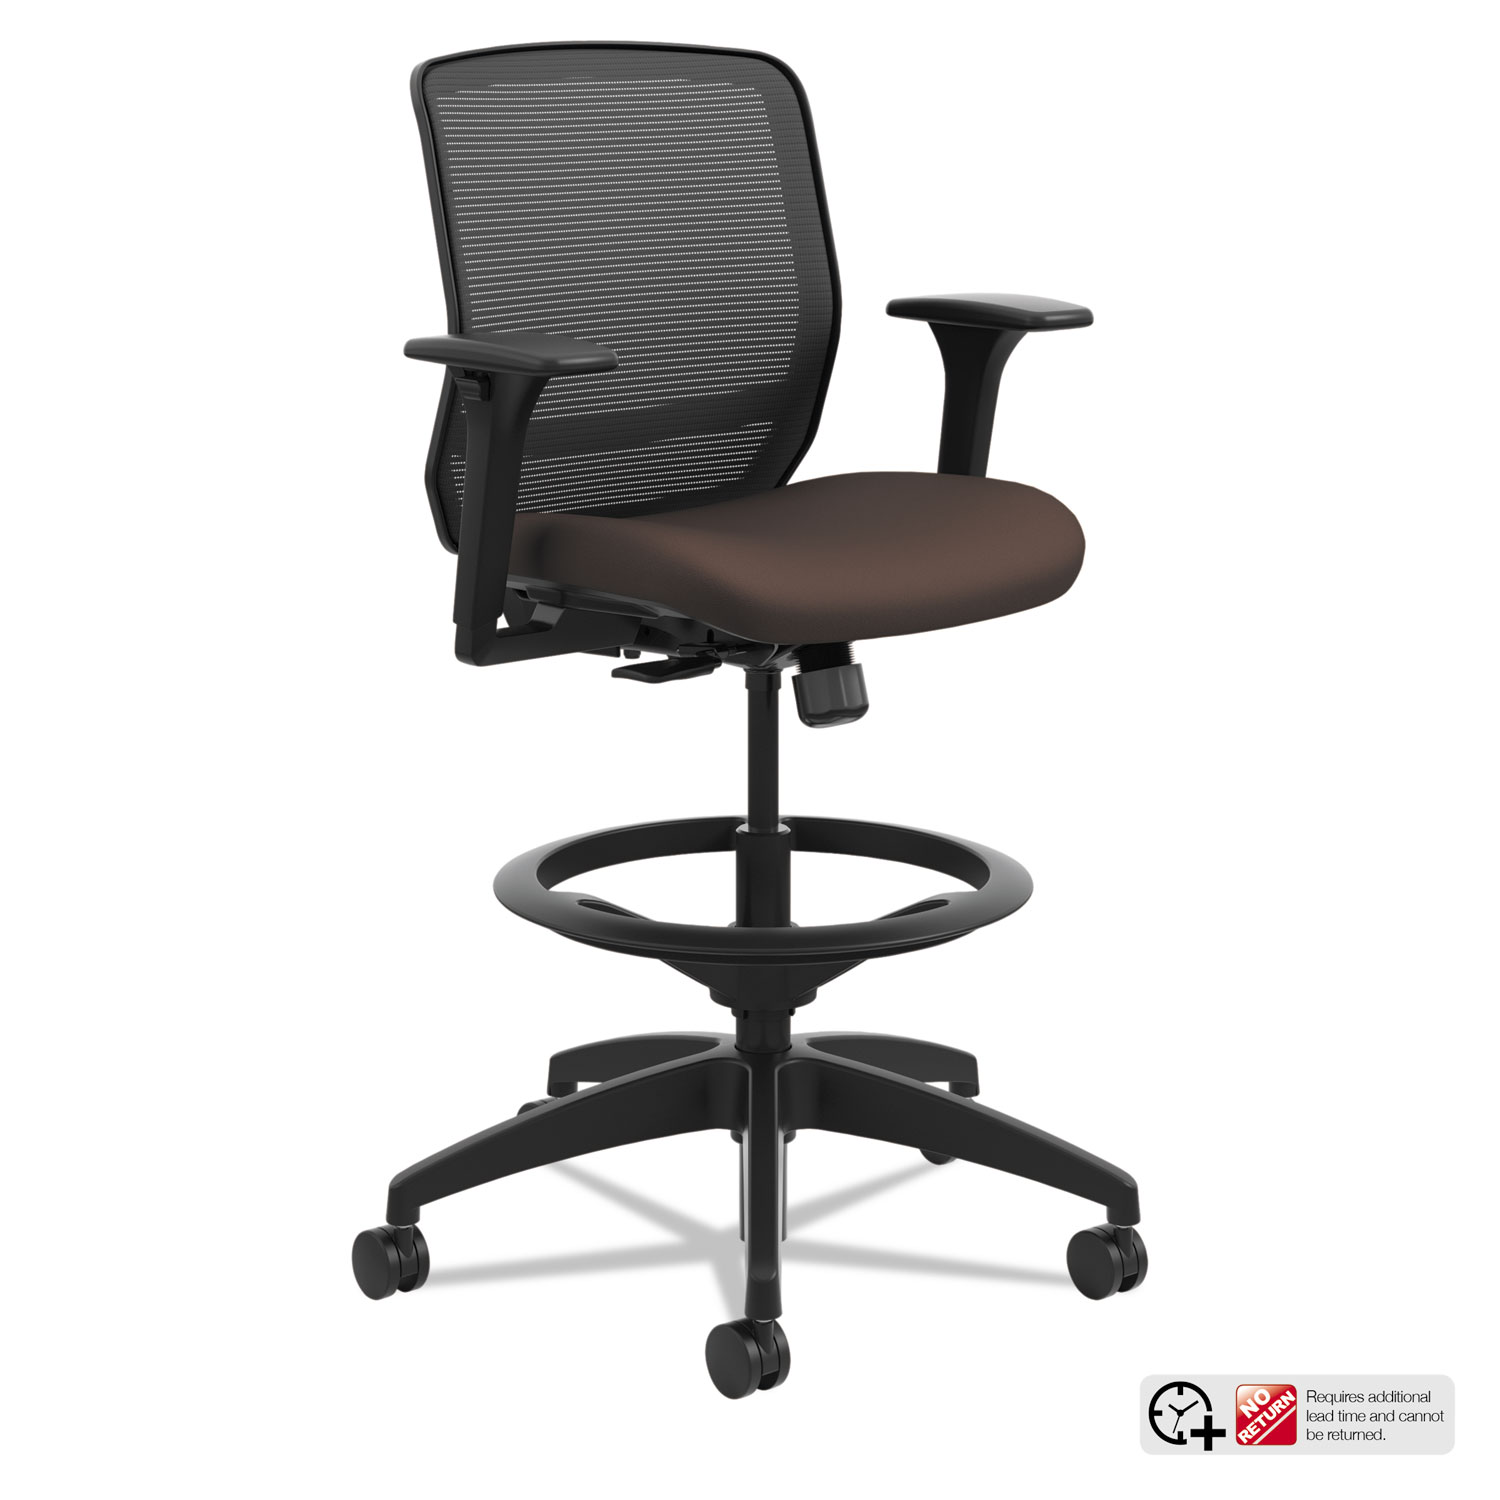  HON HQTSM.Y0.A.H.IM.CU49.SB Quotient Series Mesh Mid-Back Task Stool, 33 Seat Height, Supports up to 300 lbs., Espresso Seat/Black Back, Black Base (HONQTSMY1ACU49) 